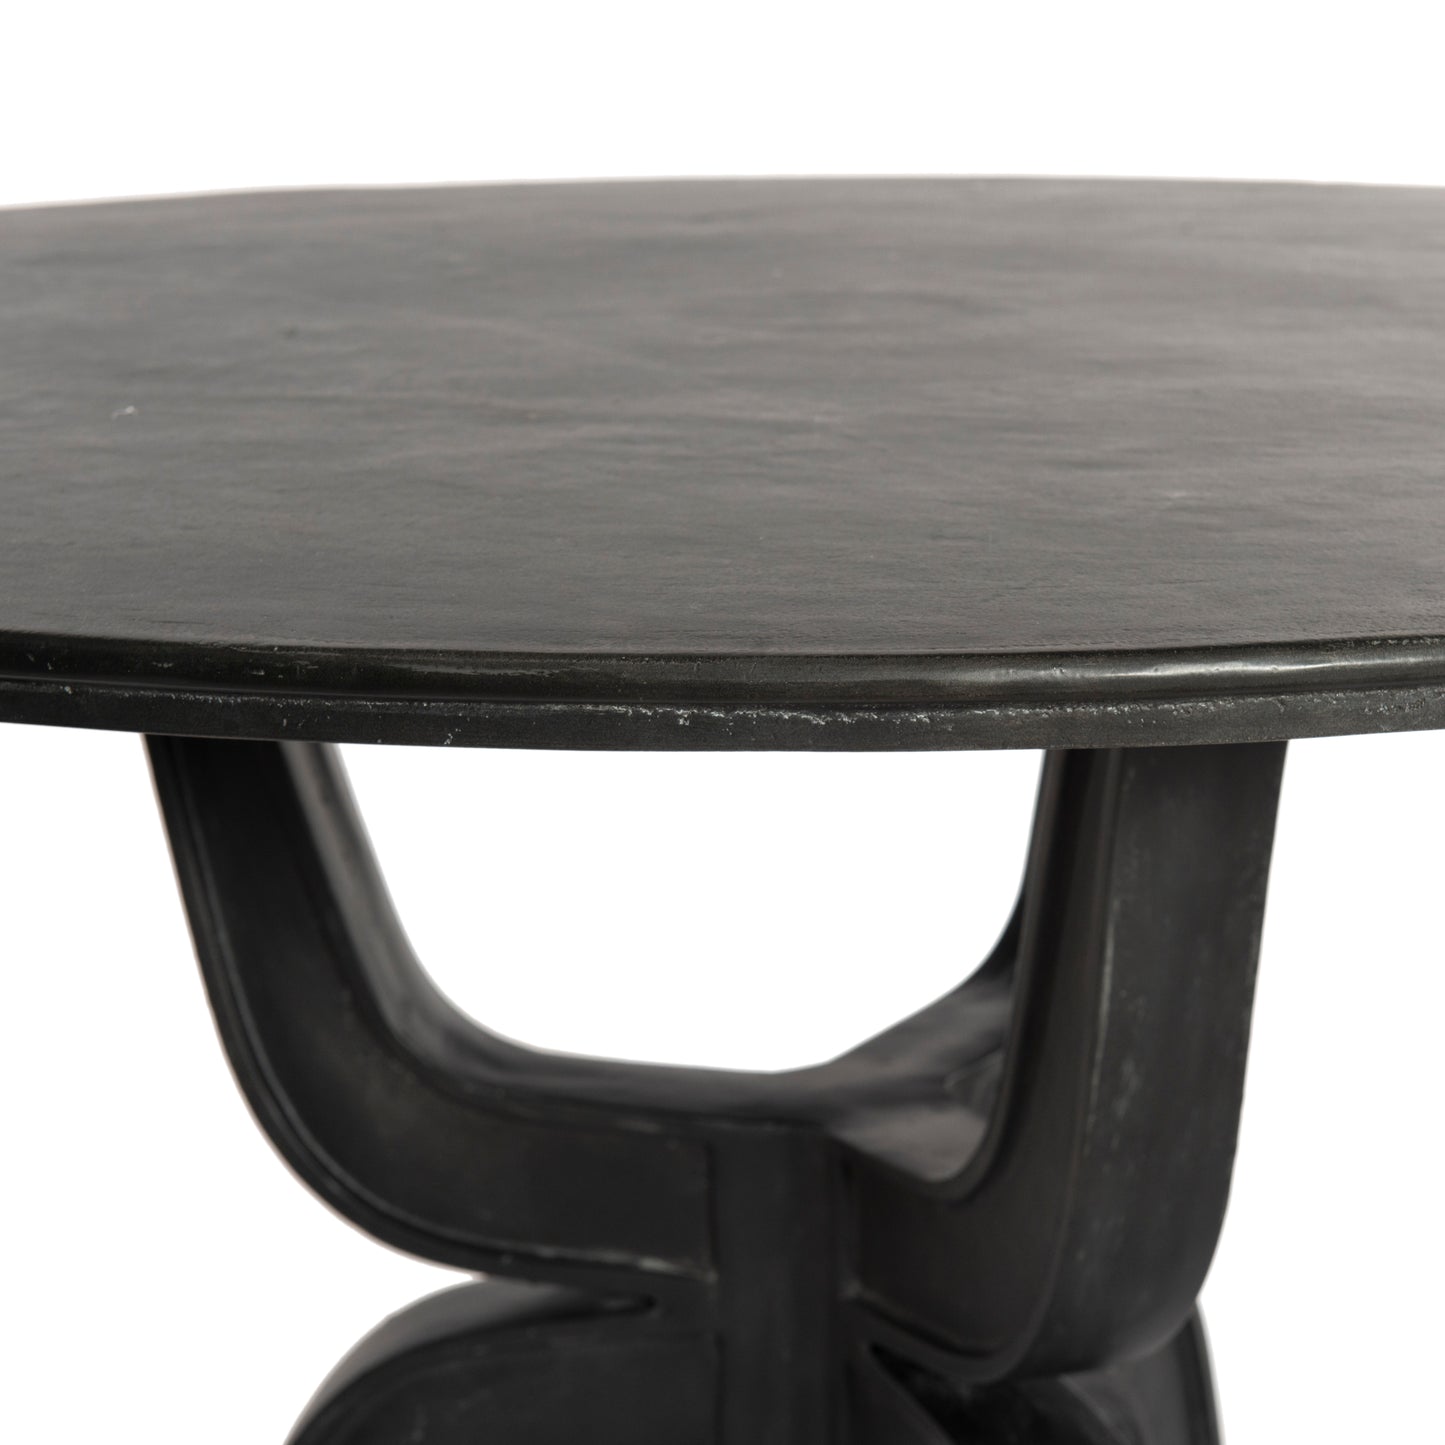 Raven Outdoor Dining Table